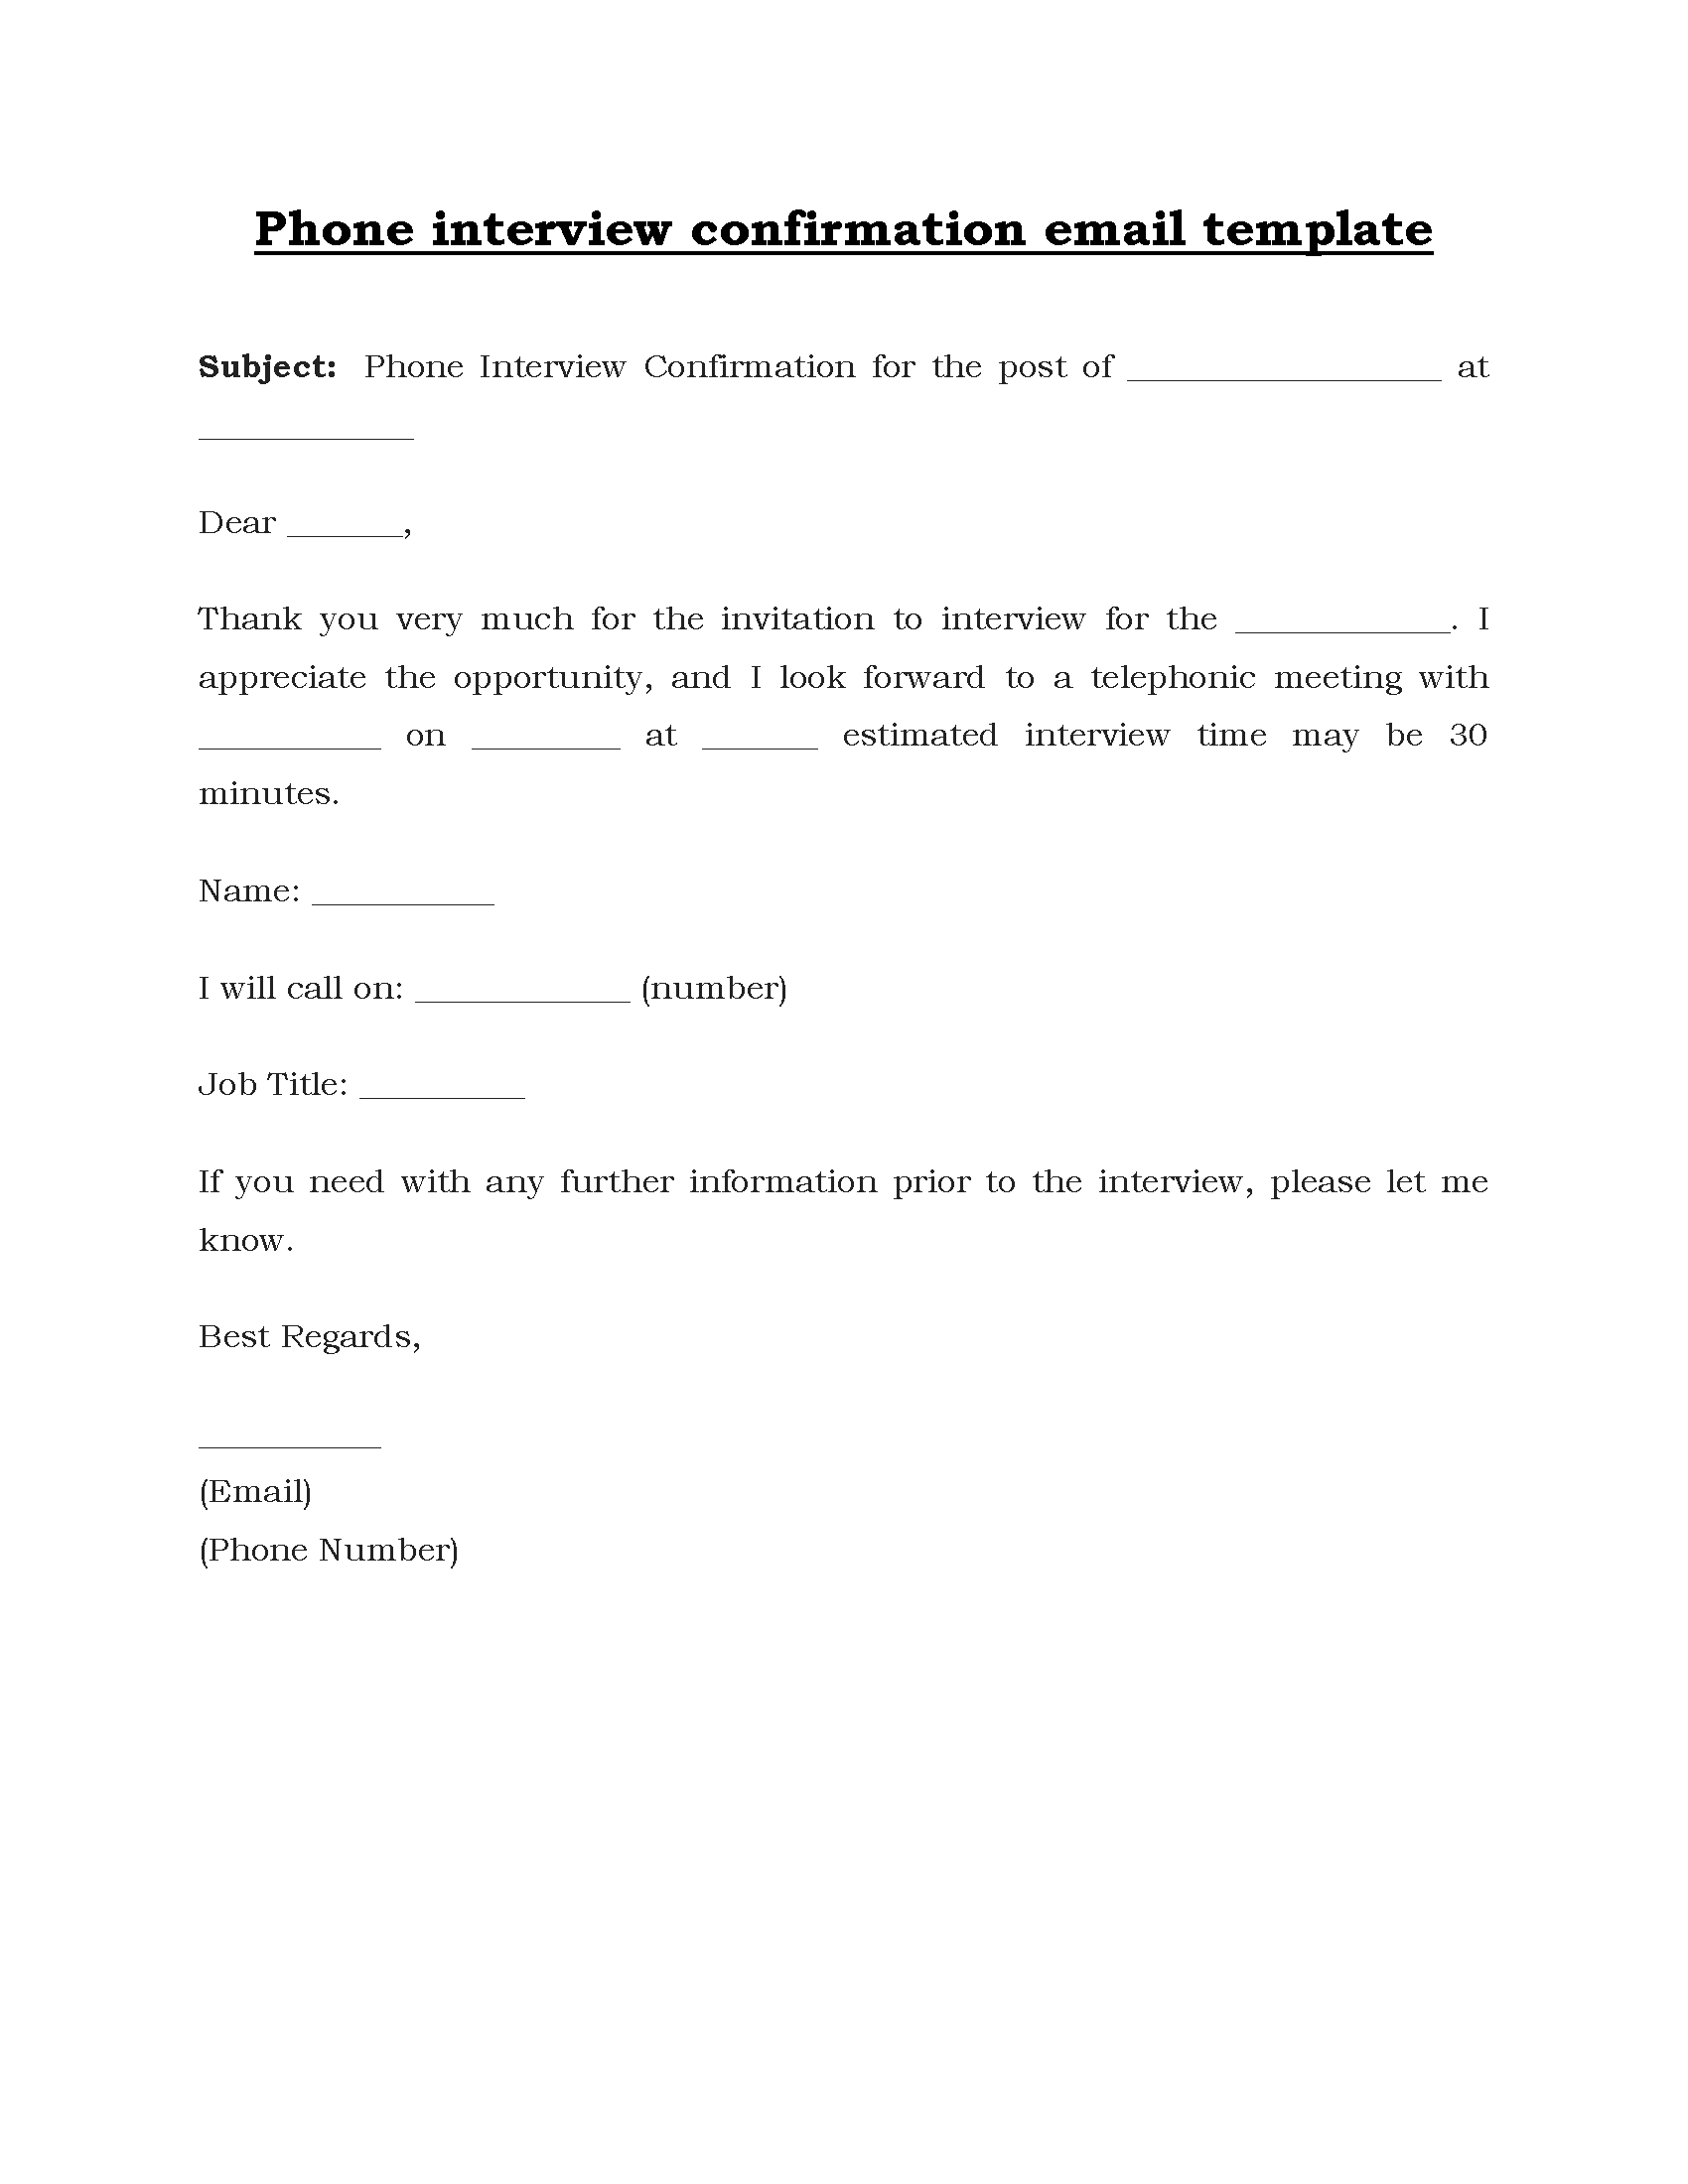 10- Phone-interview-confirmation-email-template